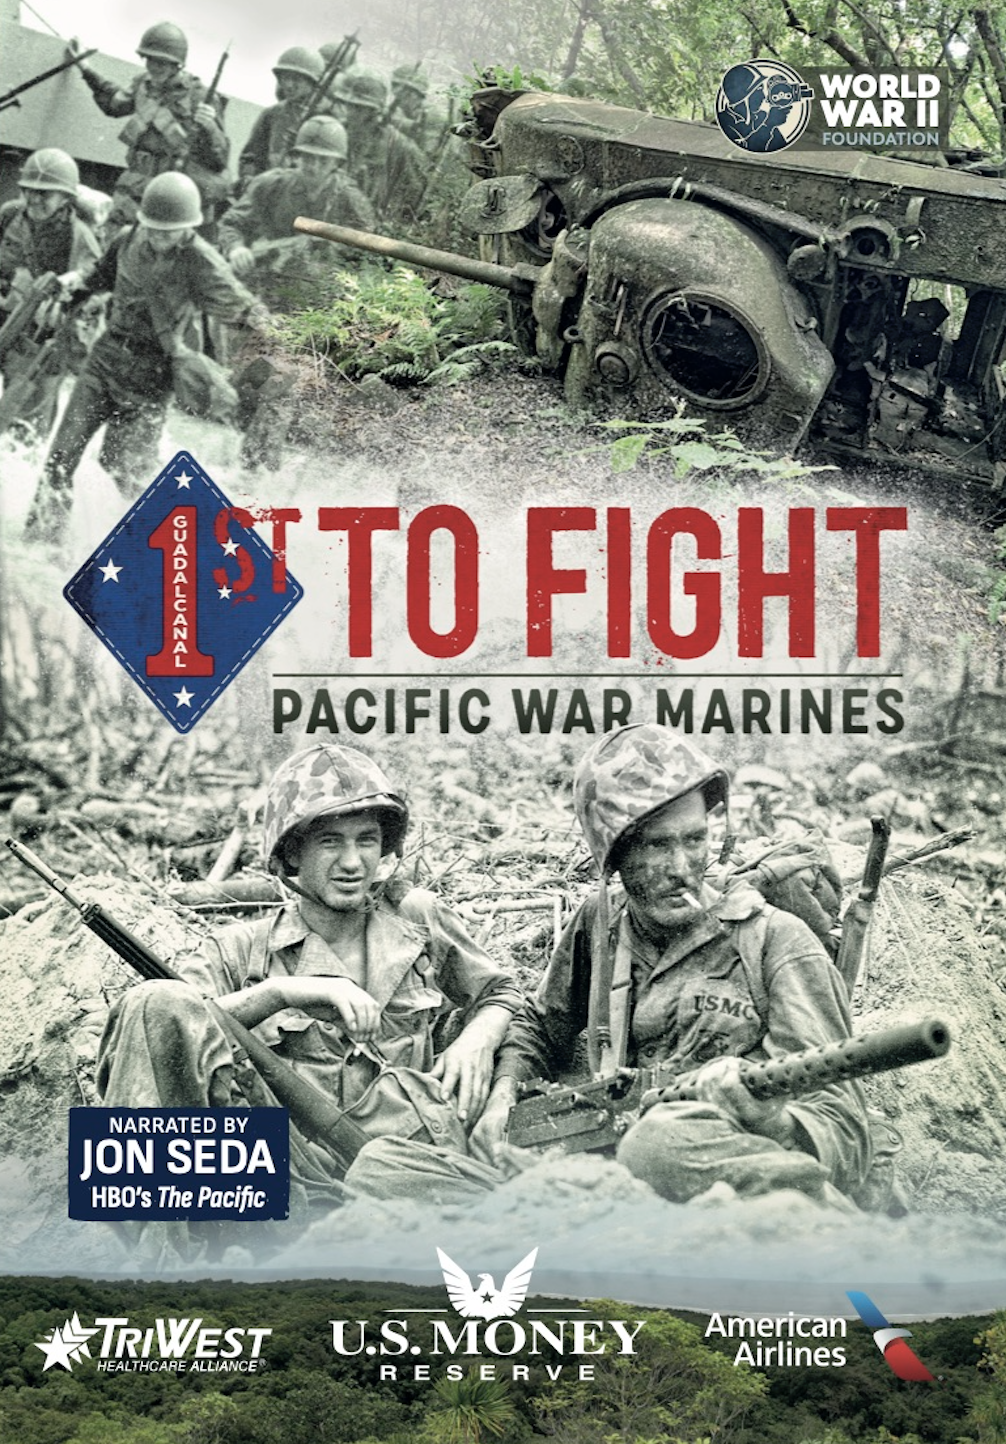 1st to Fight: Pacific War Marines - WWII Foundation